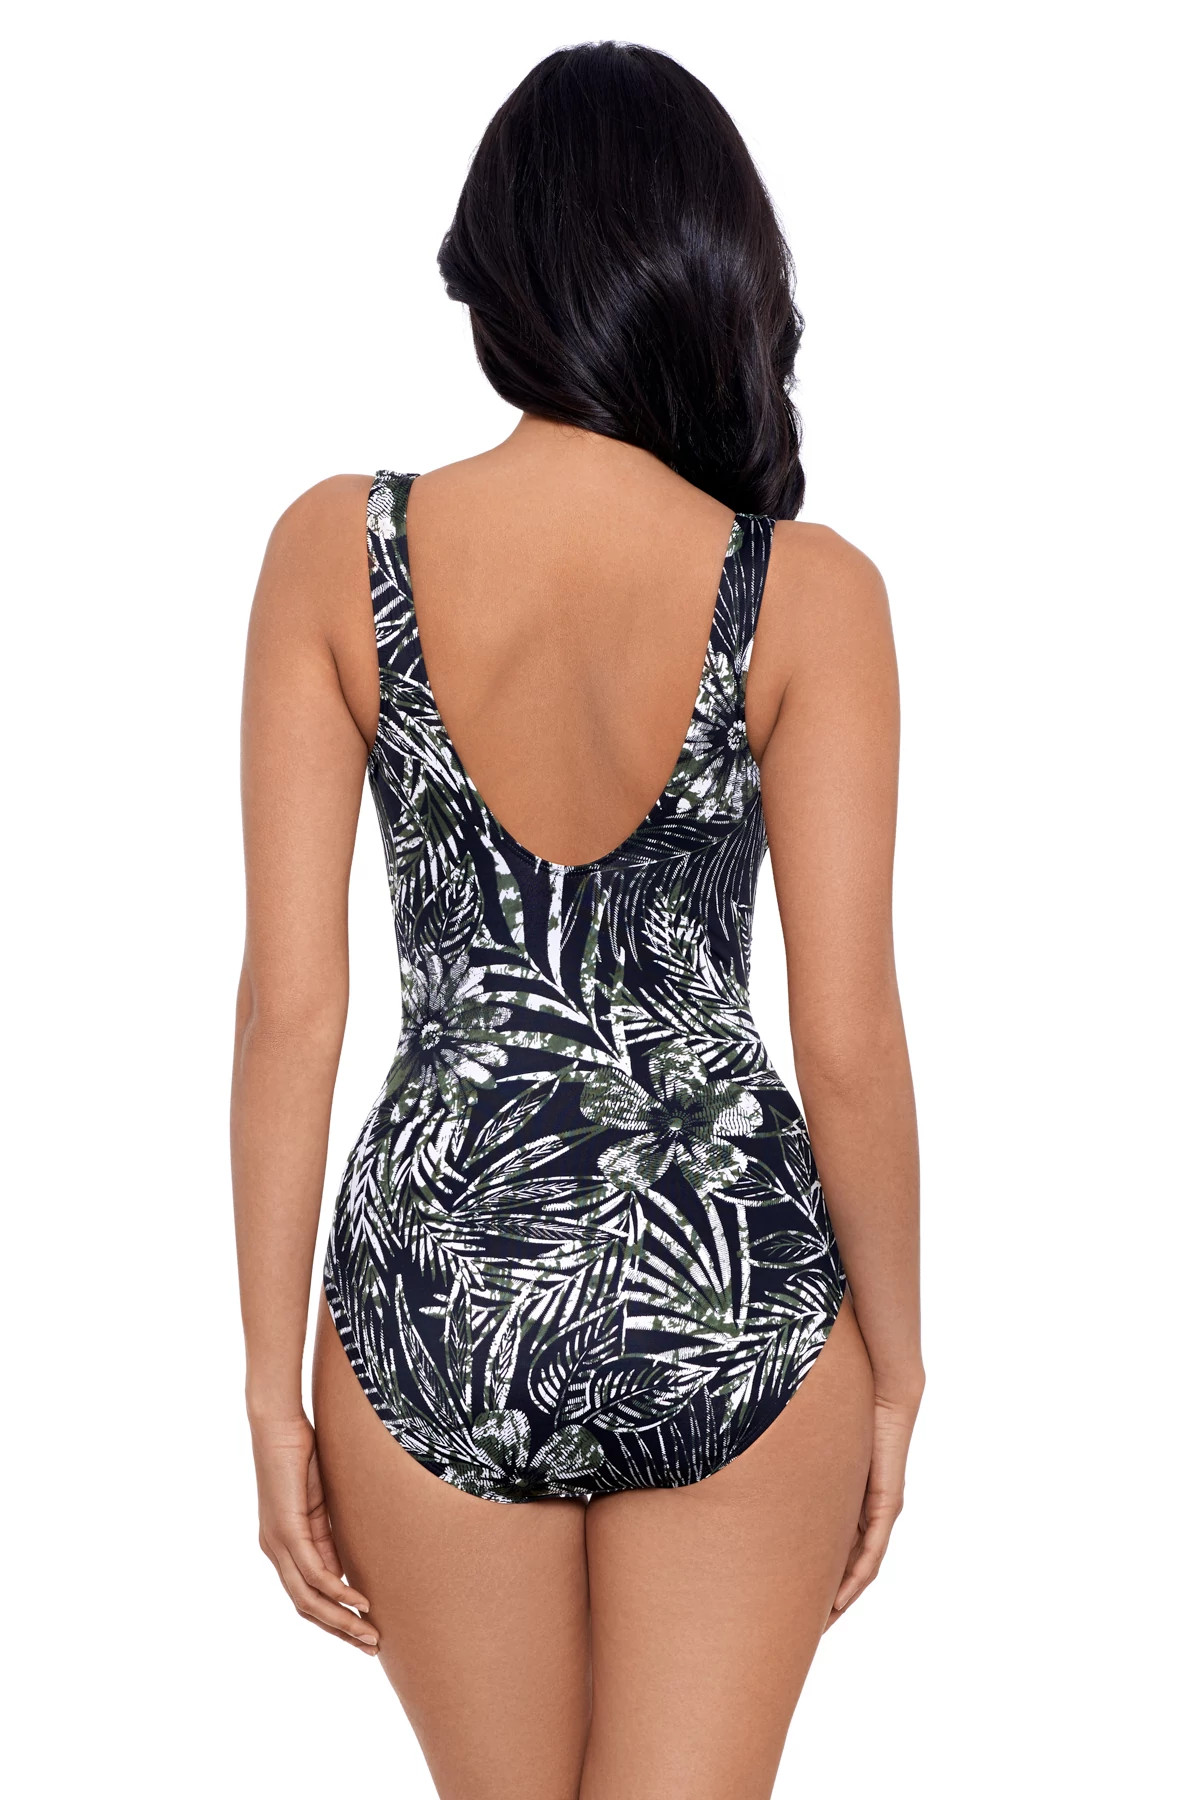 BLACK/MULTI Zahara It's A Wrap One Piece Swimsuit image number 2